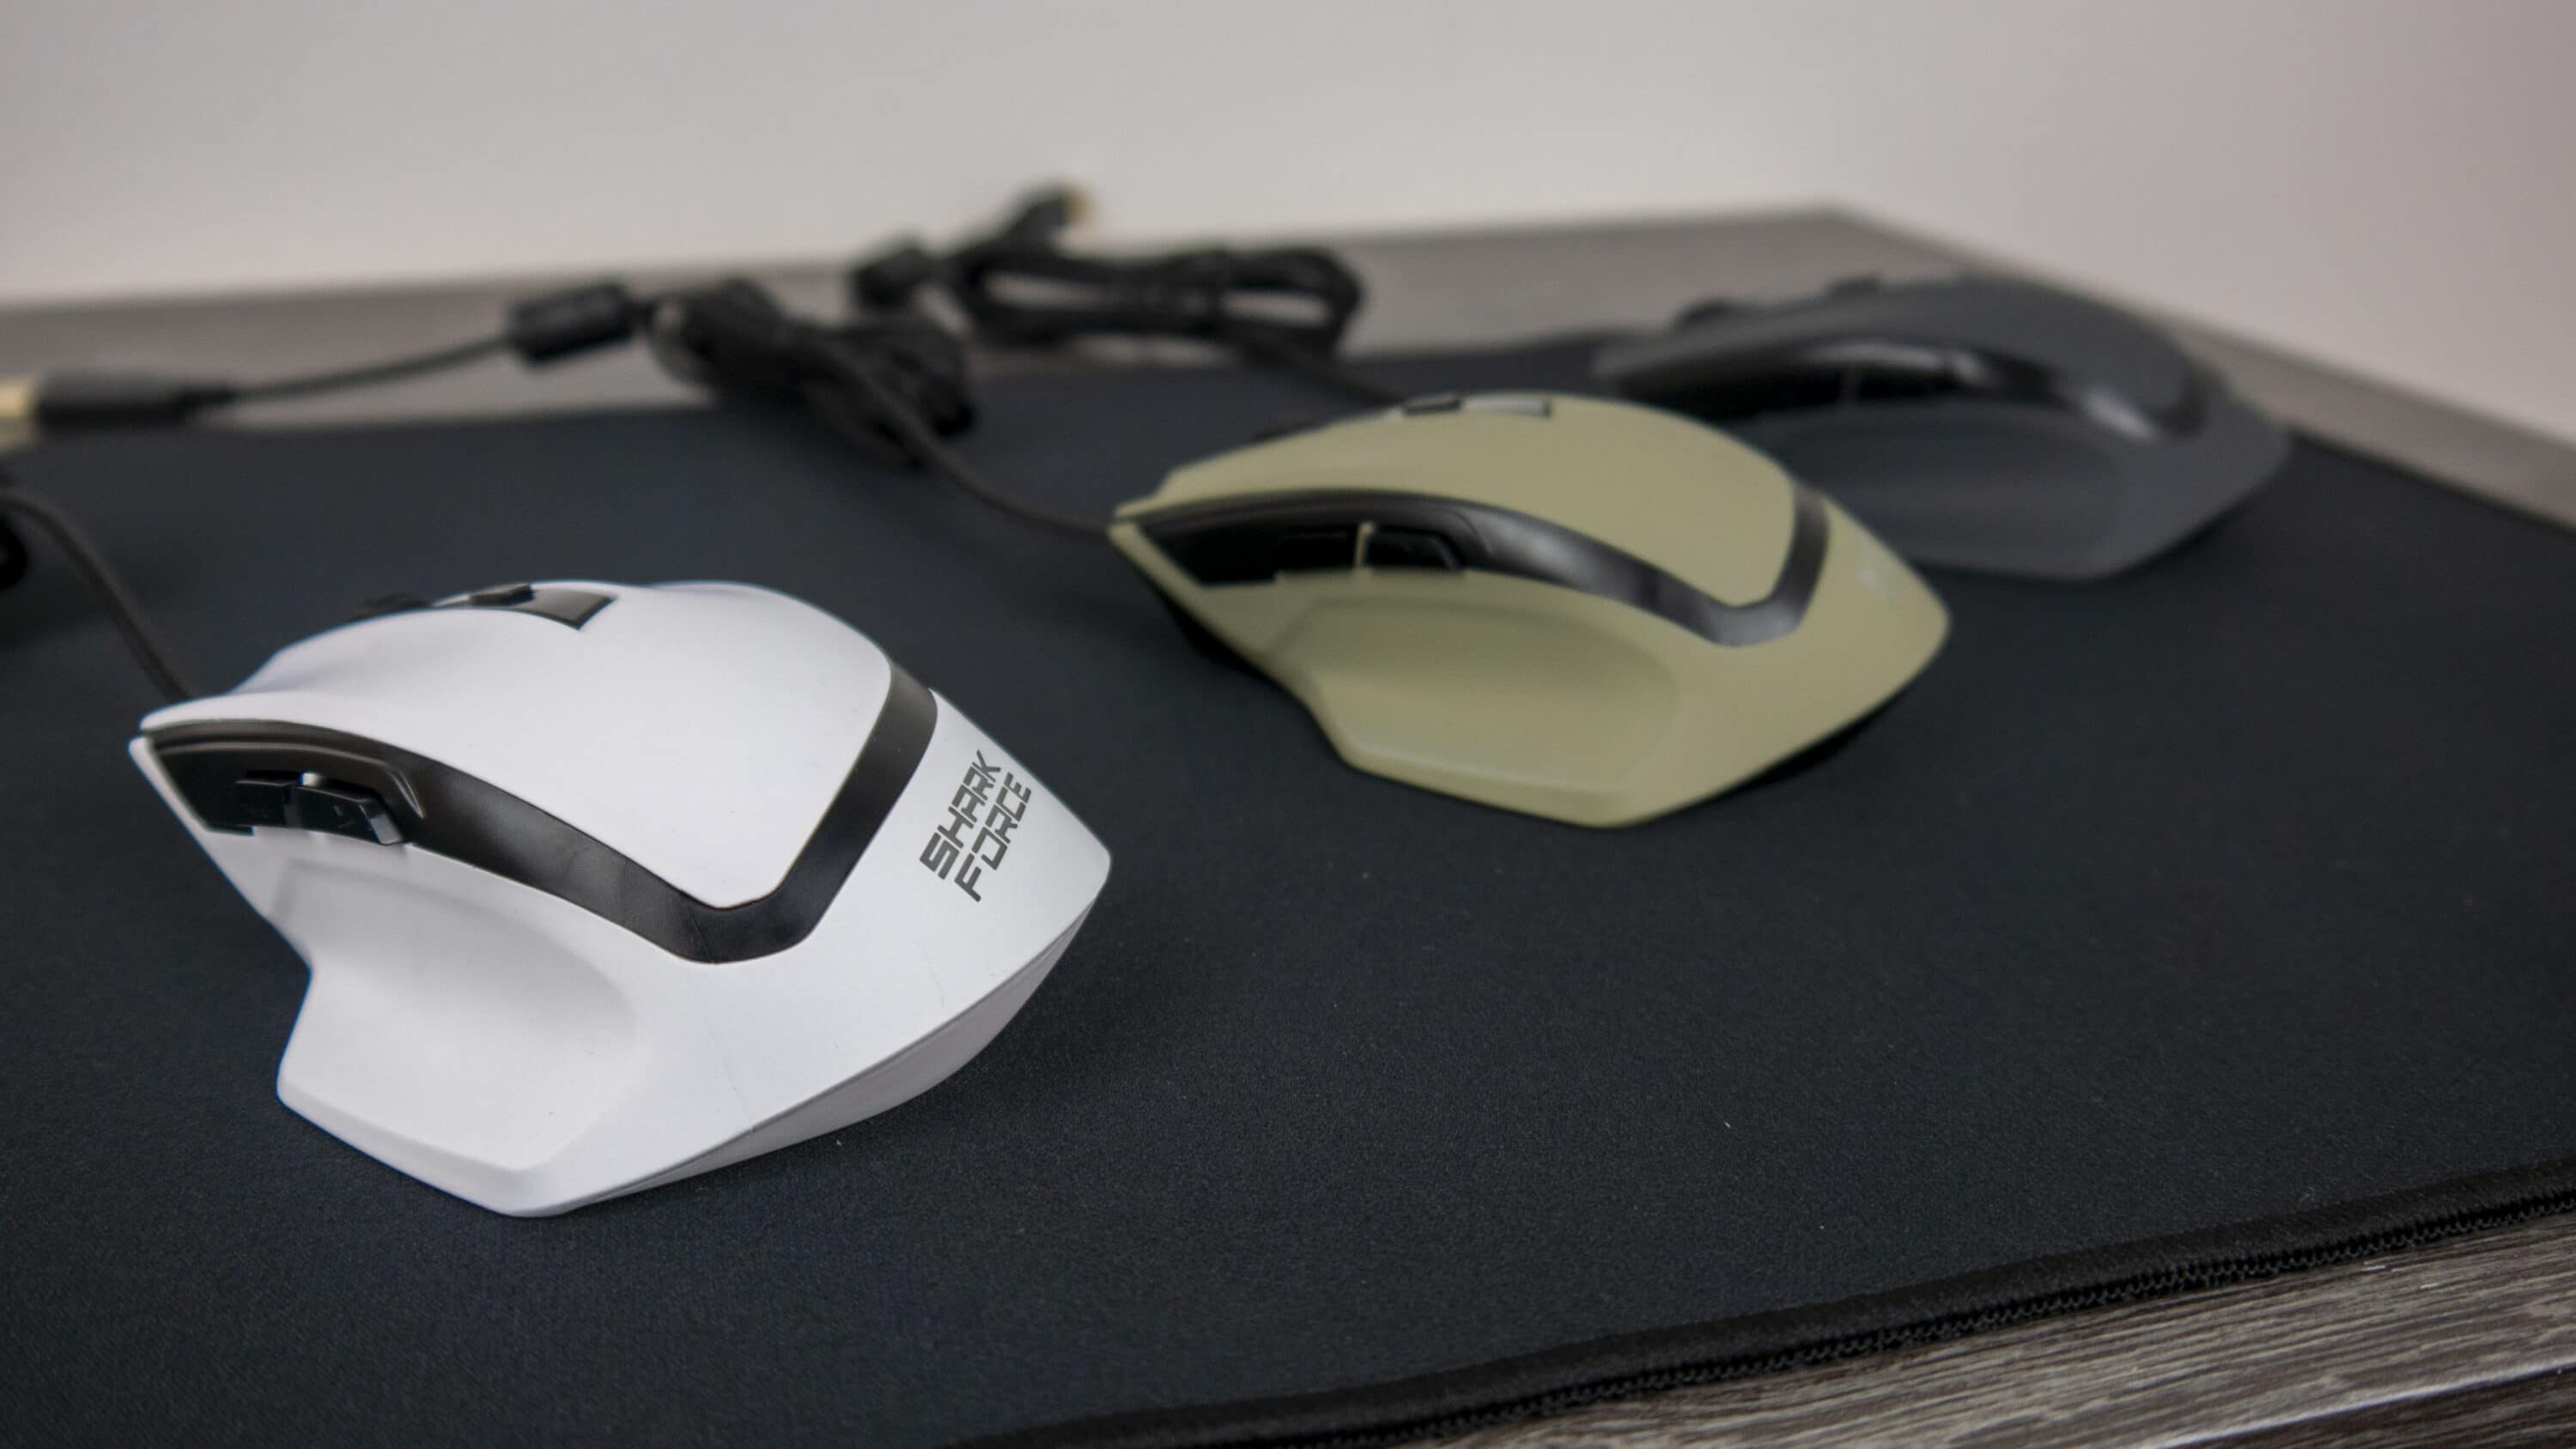 Cheap or ll in Shark low-priced? The Sharkoon test Force mouse gaming